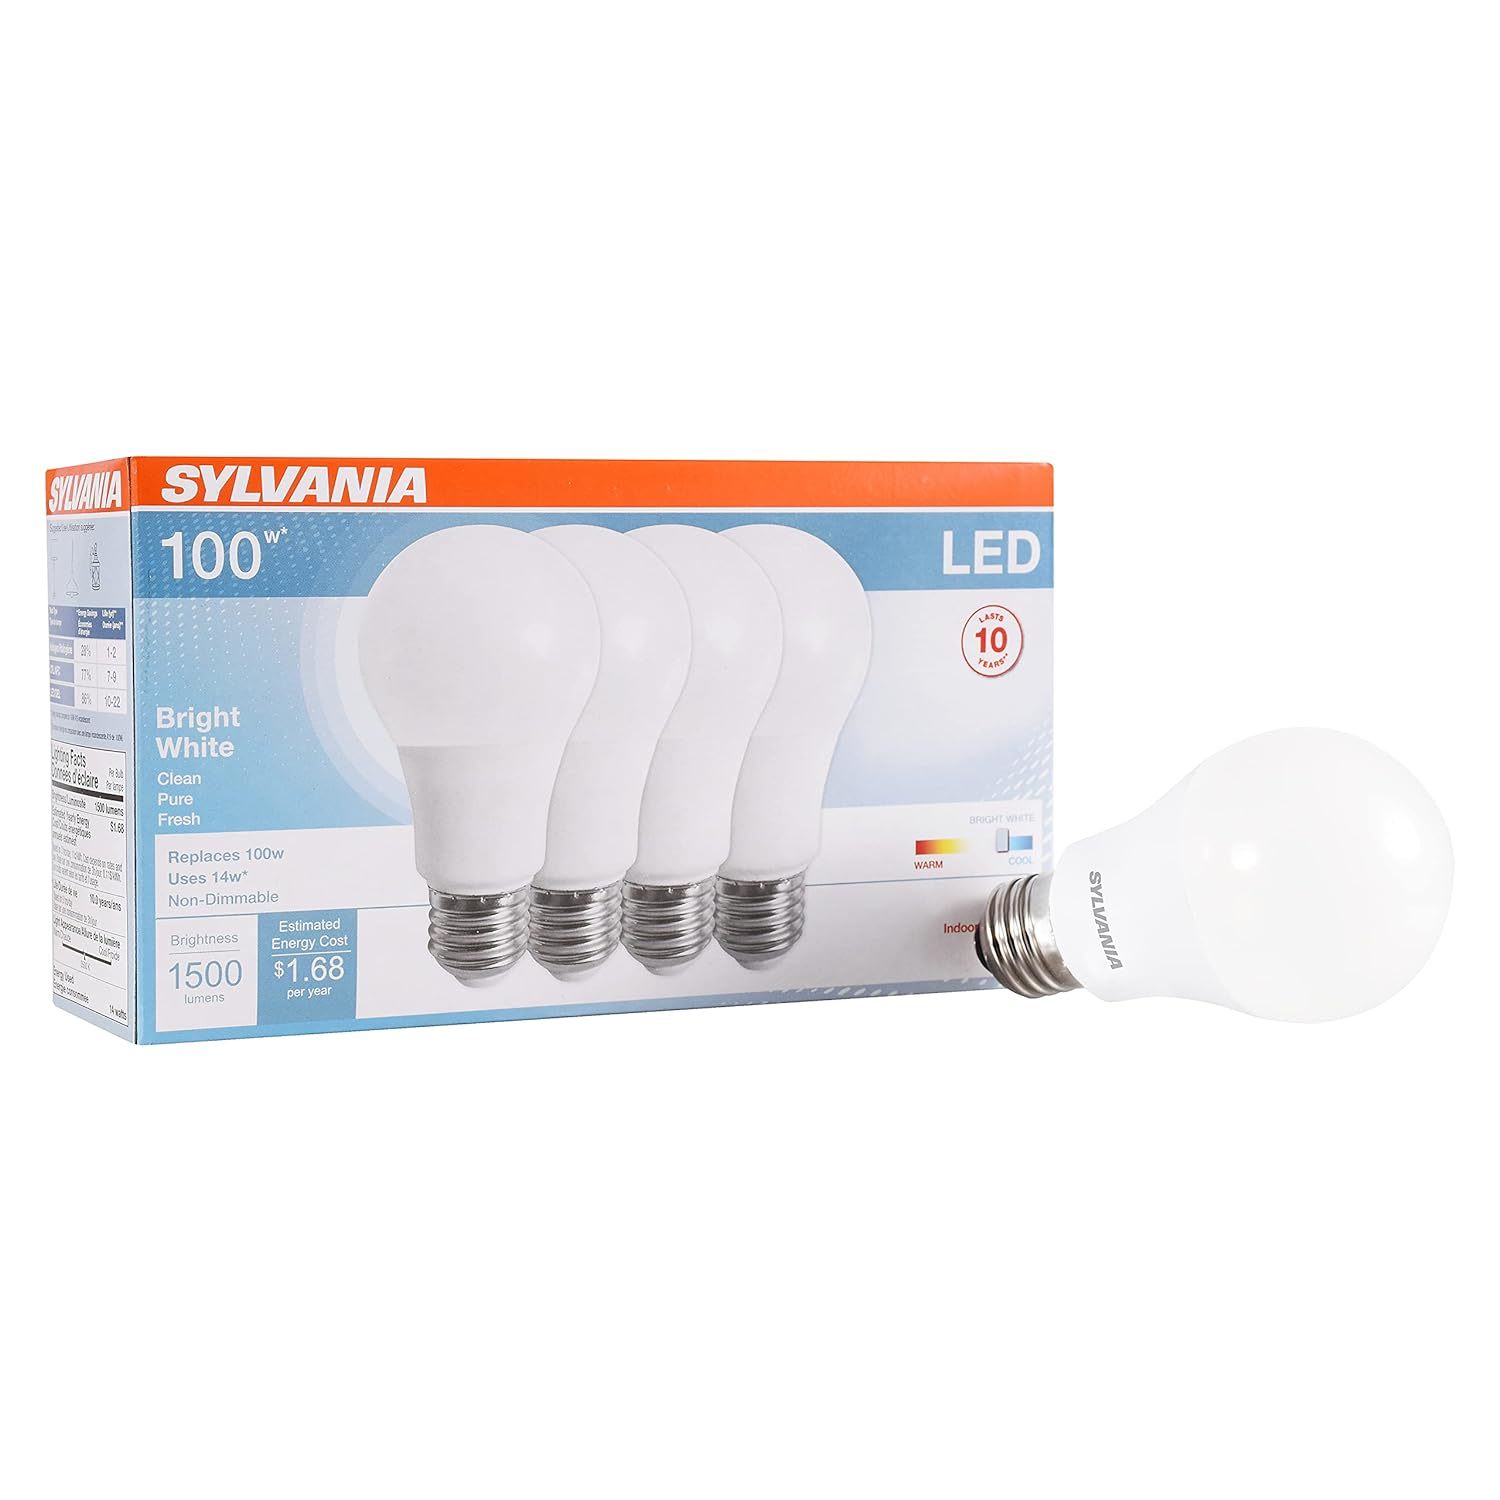 SYLVANIA LED Light Bulb, 100W Equivalent A19, Efficient 14W, Frosted Finish, 150 - $37.99